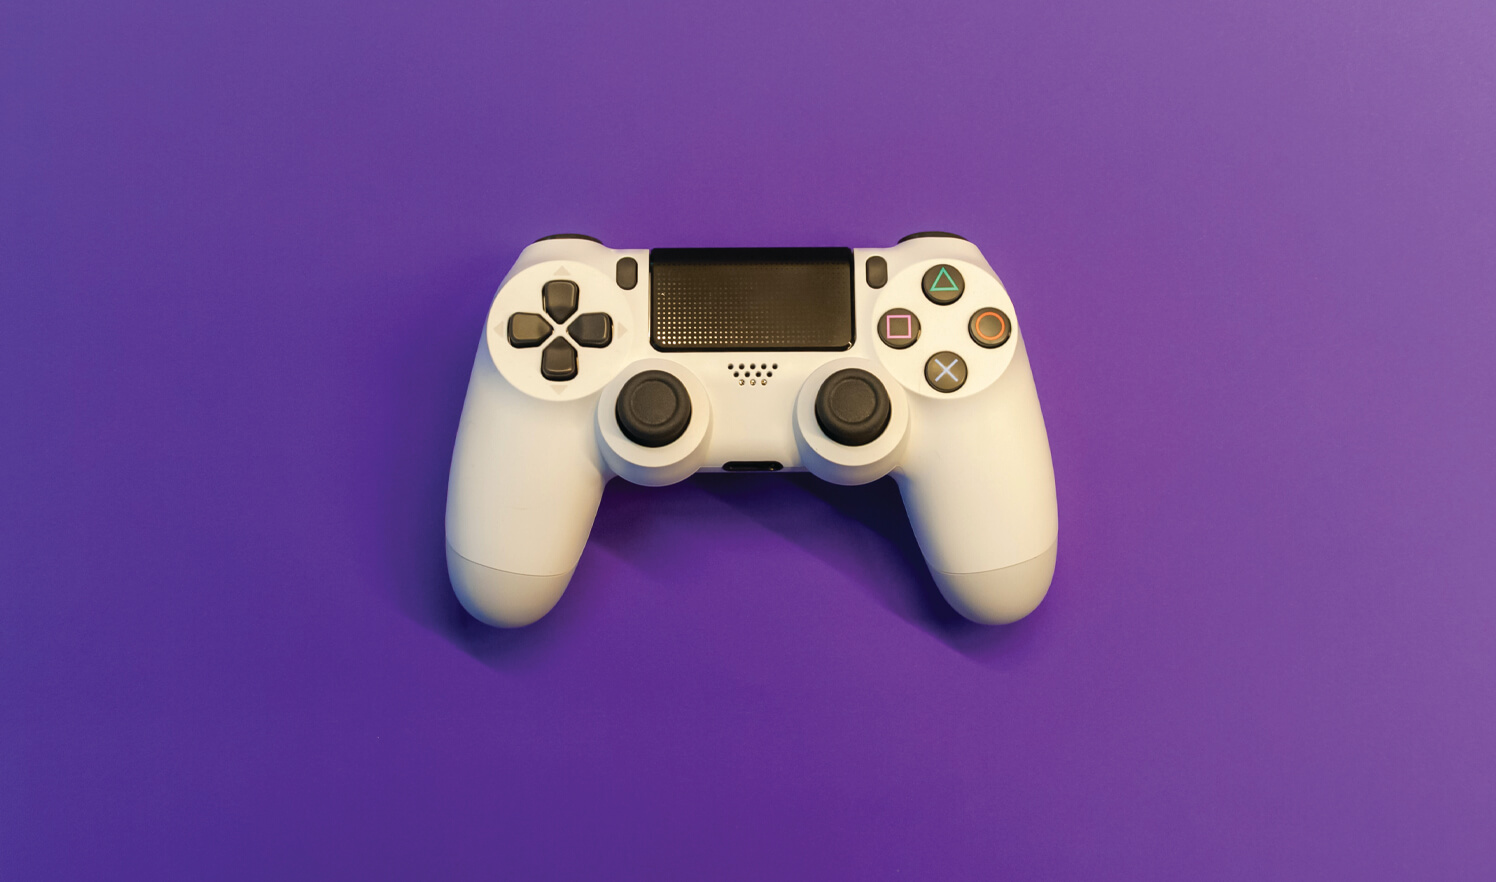 How to connect ps4 controller to ps4?